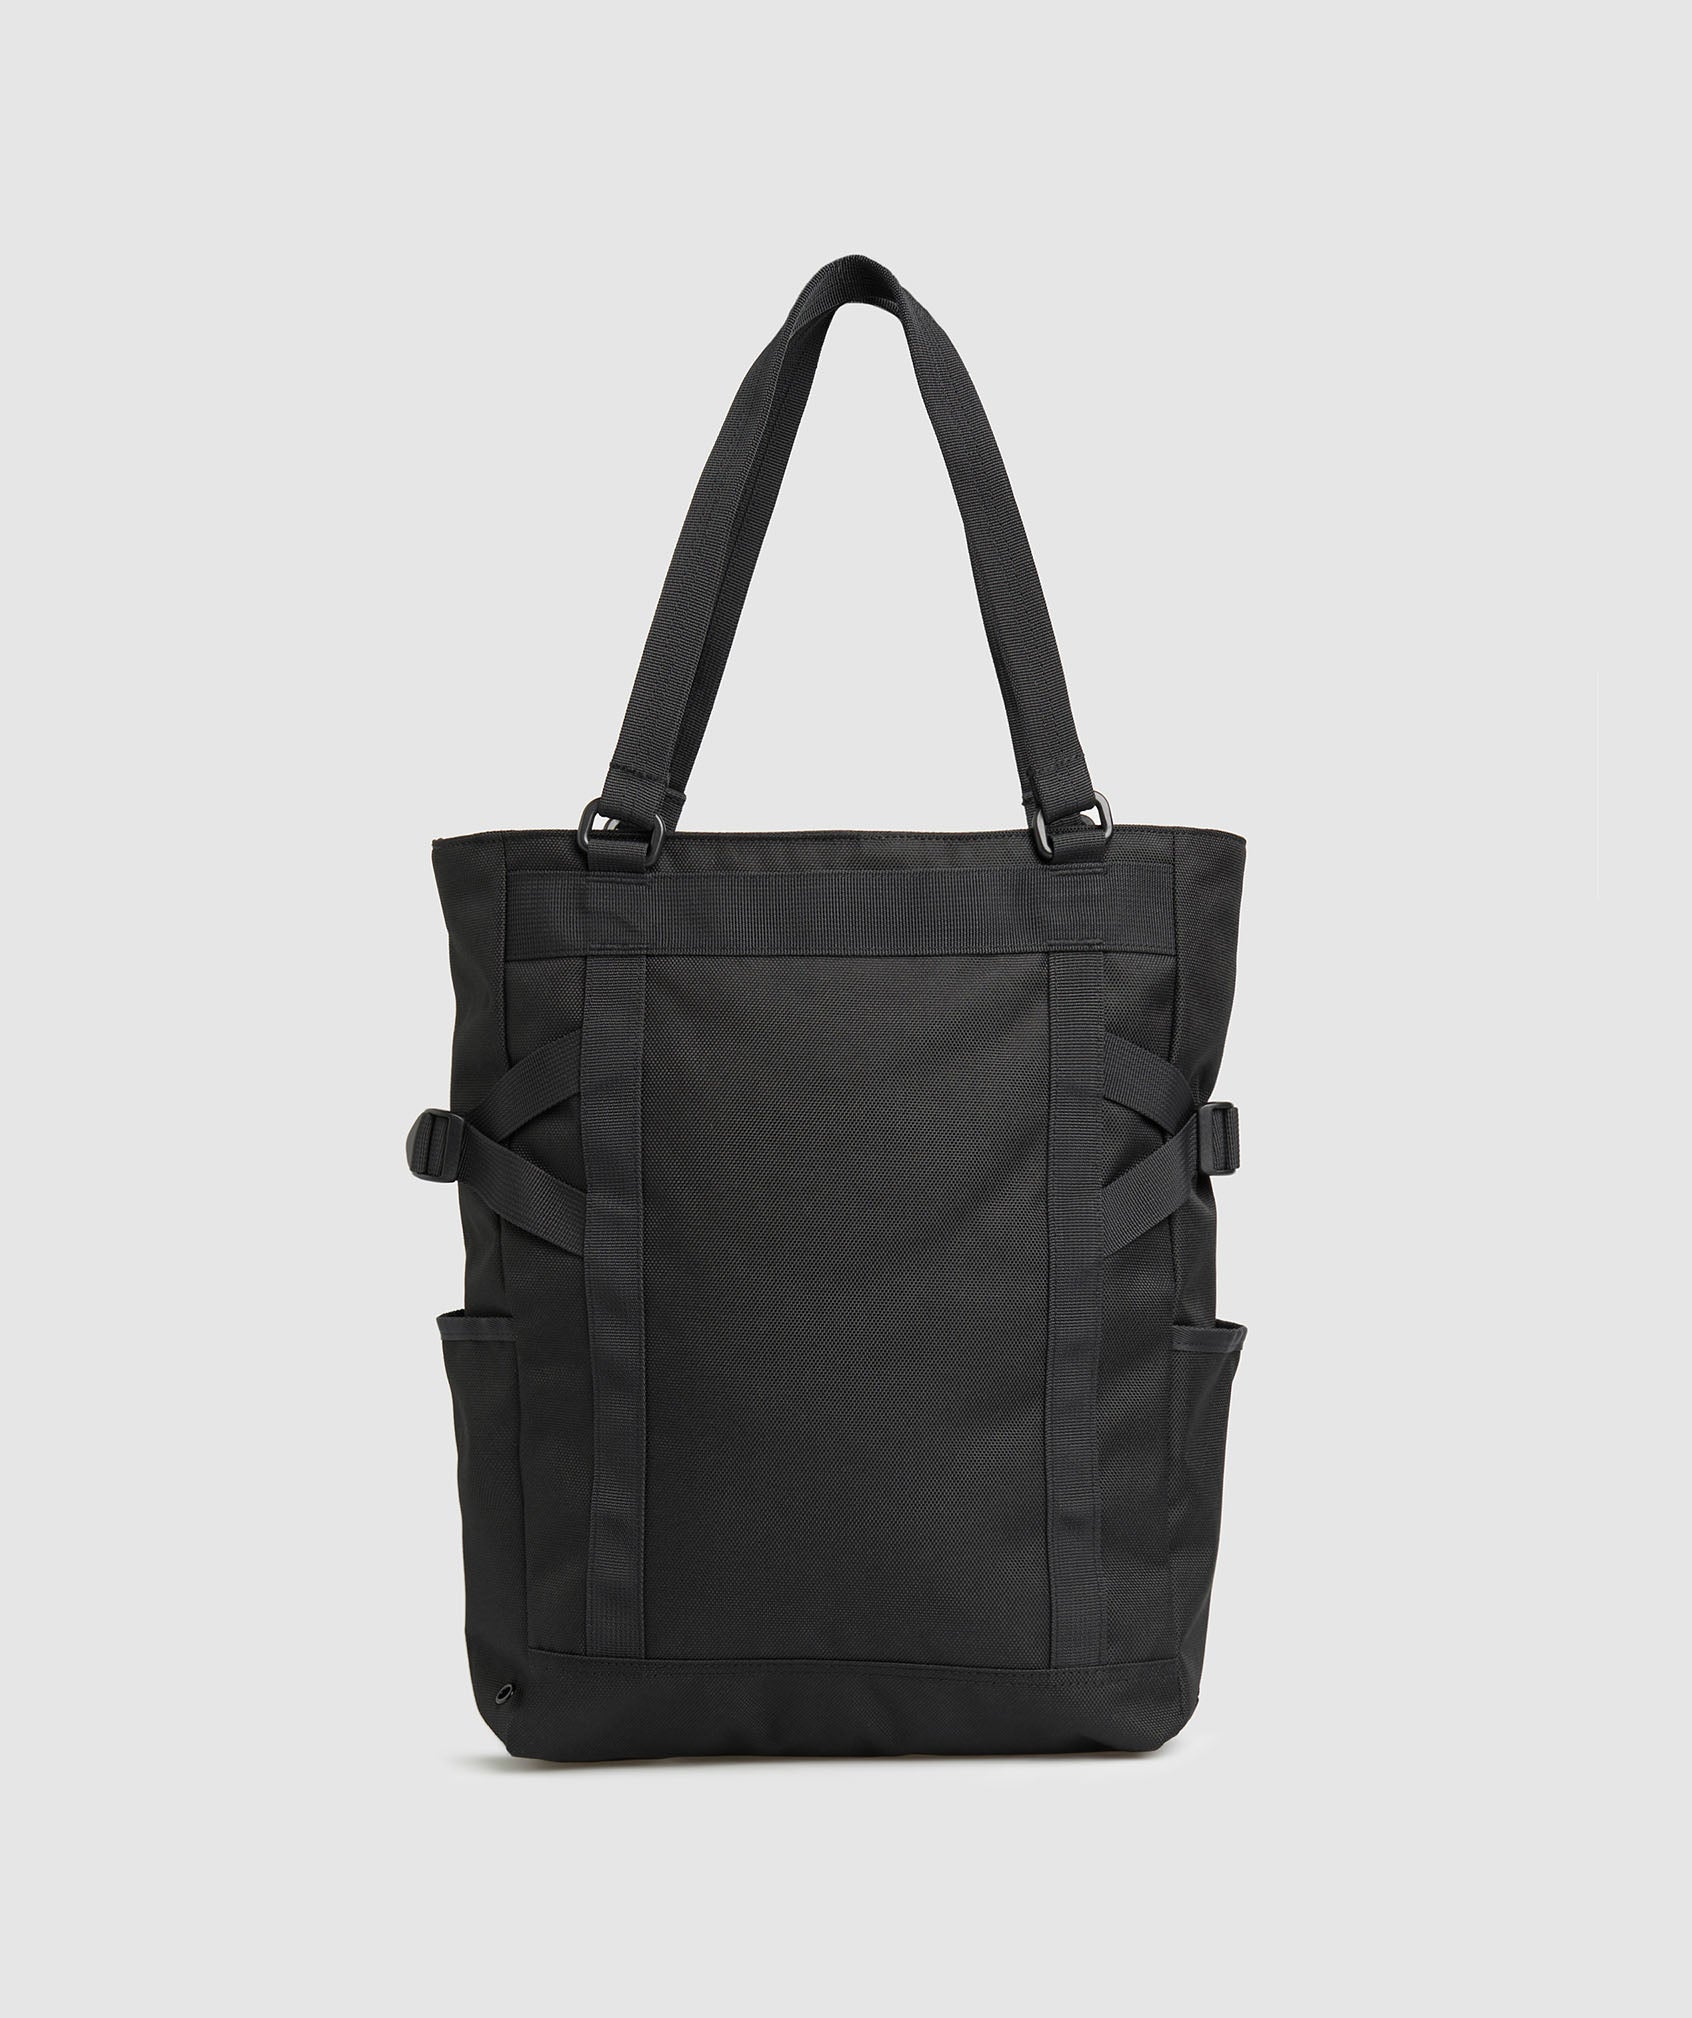 Pursuit Tote in Black - view 2